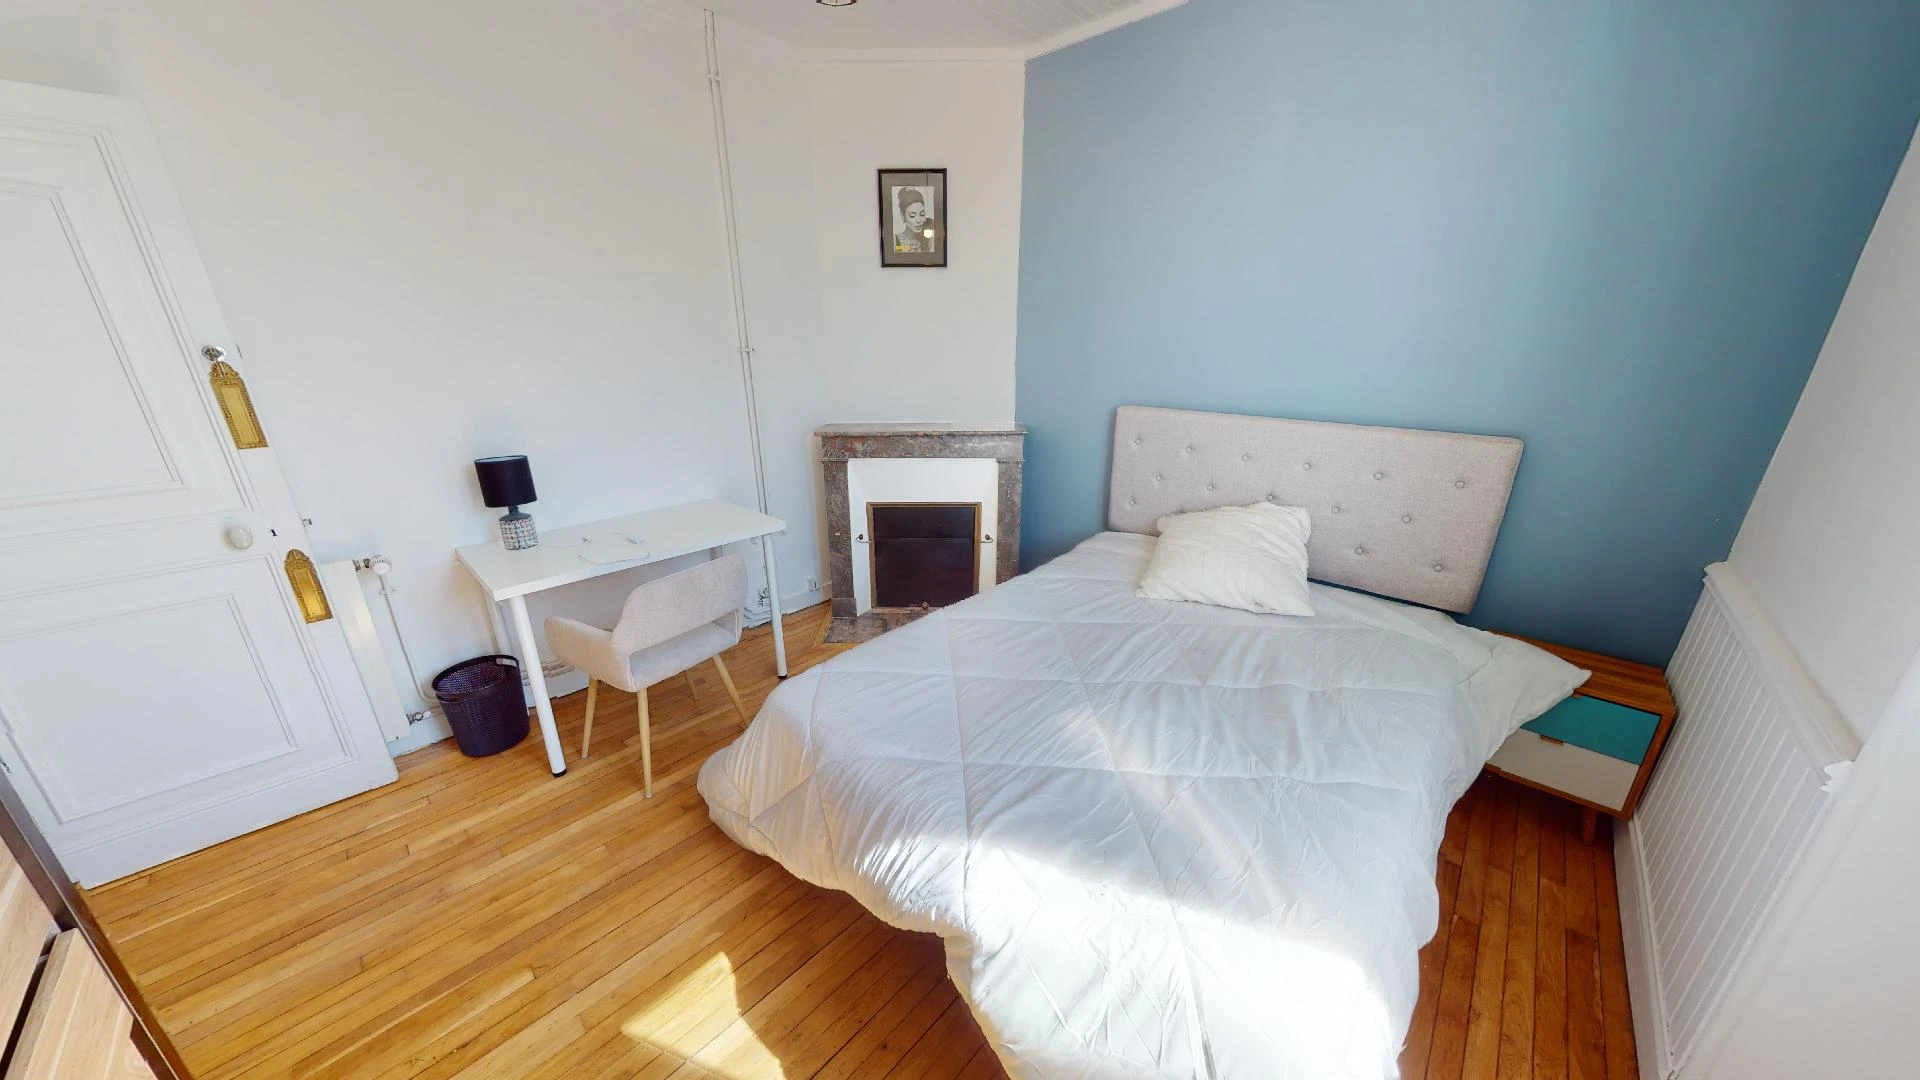 Cheap private room in poitiers